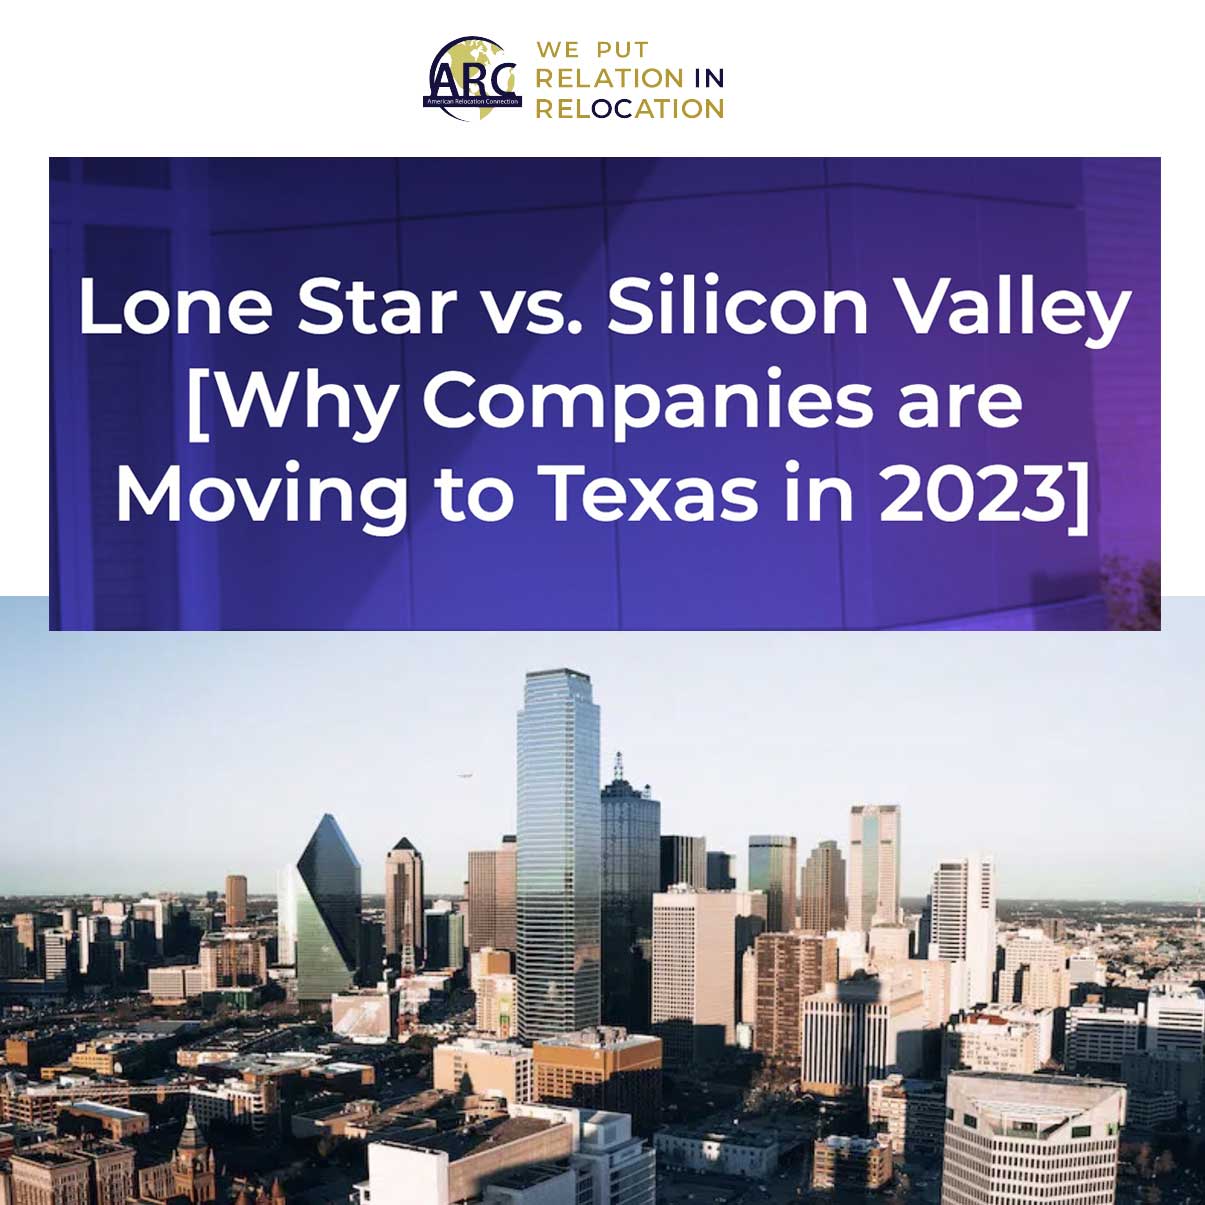 Lone Star VS Silicon Valley, Why Companies are Moving to Texas in 2023